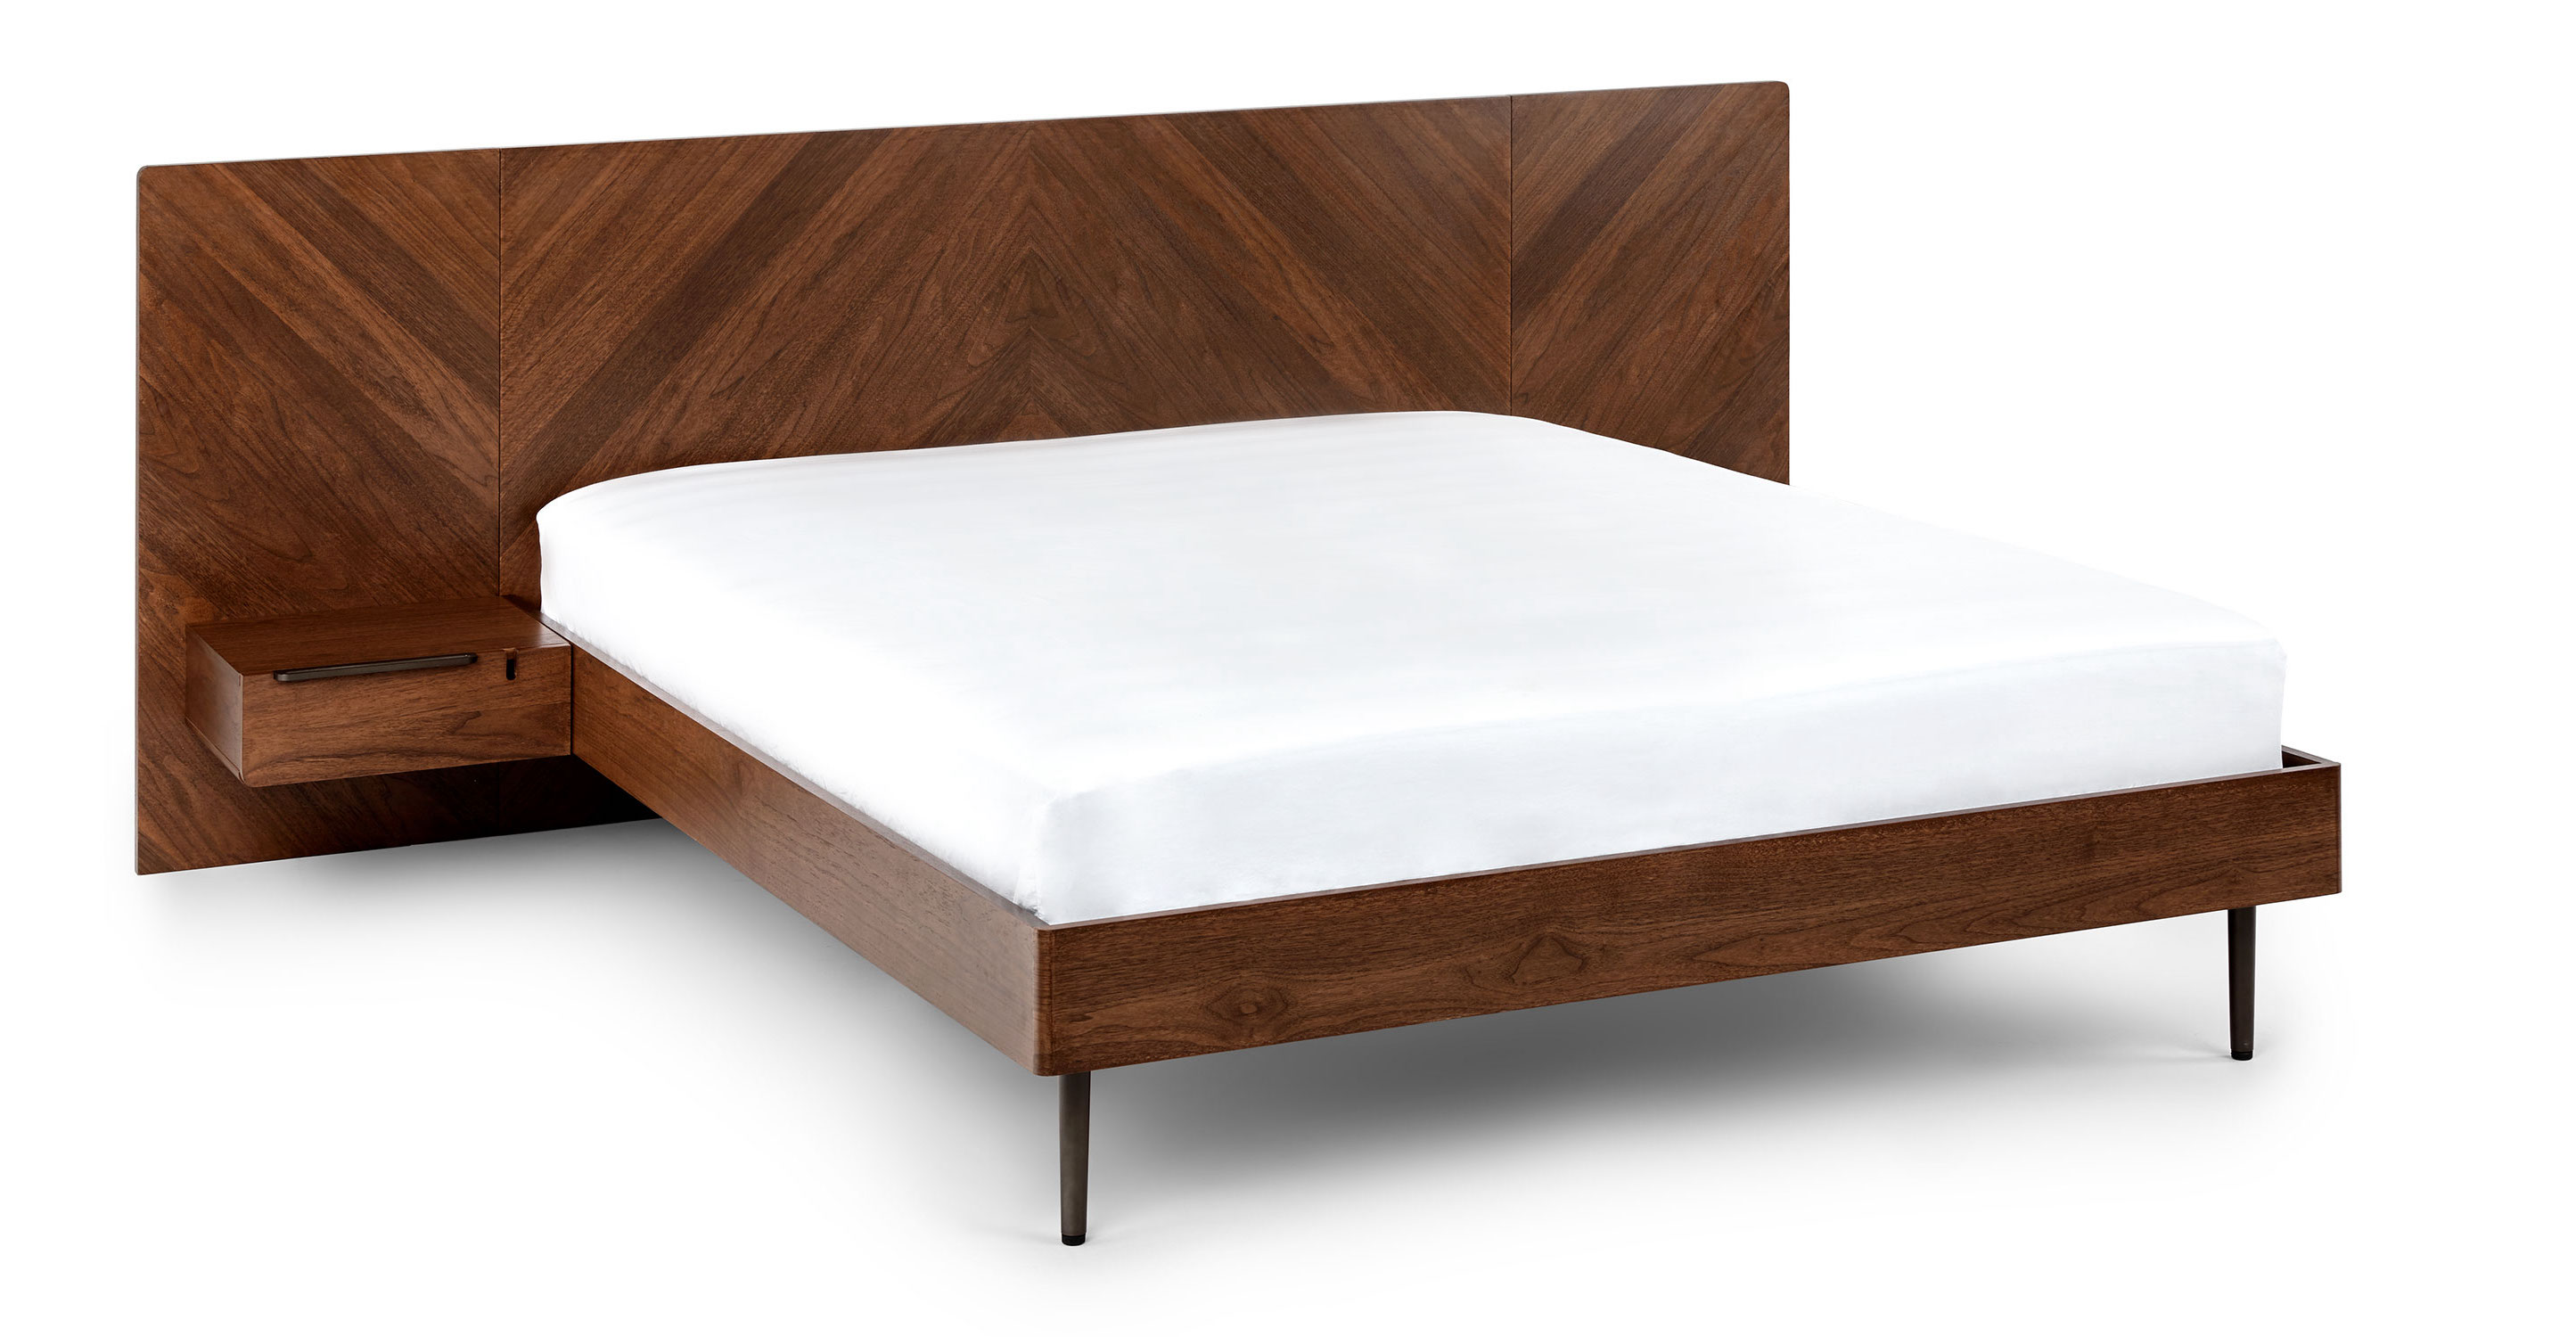 Walnut Queen-Sized Wood Bed Frame w/ Nightstands Nera Article